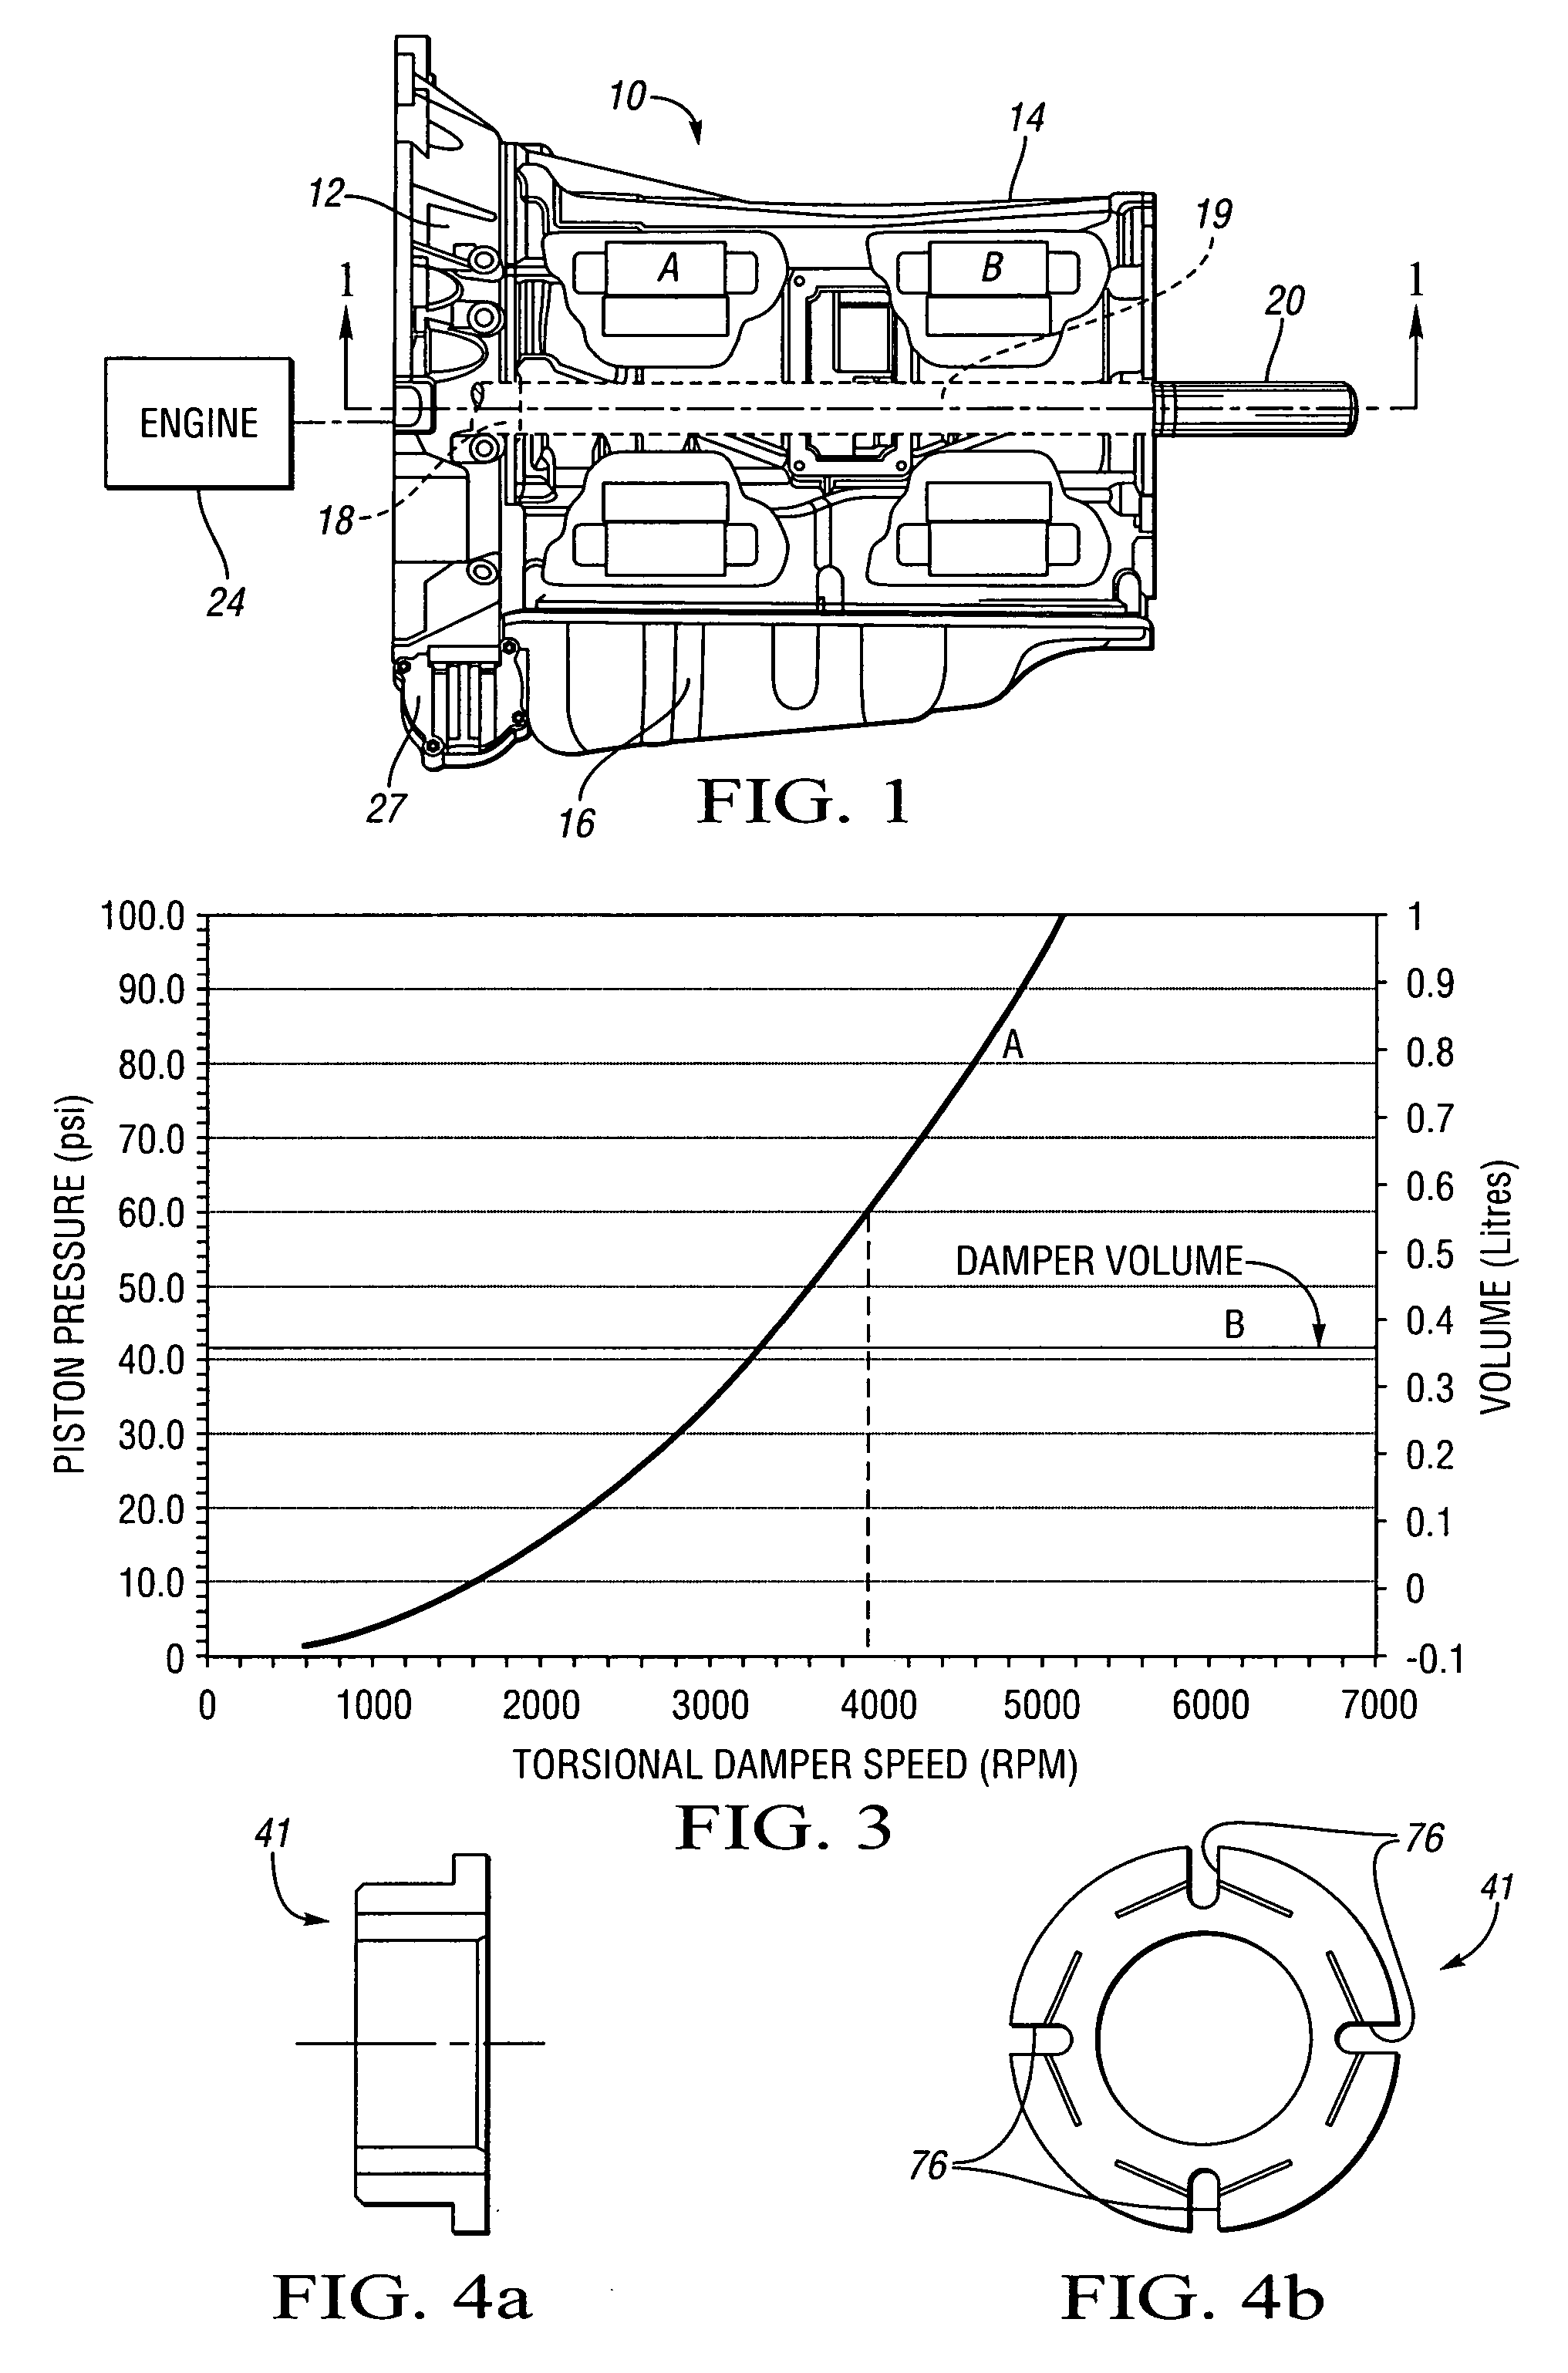 Hydraulic circuit for torsional damper assembly of an electrically variable transmission